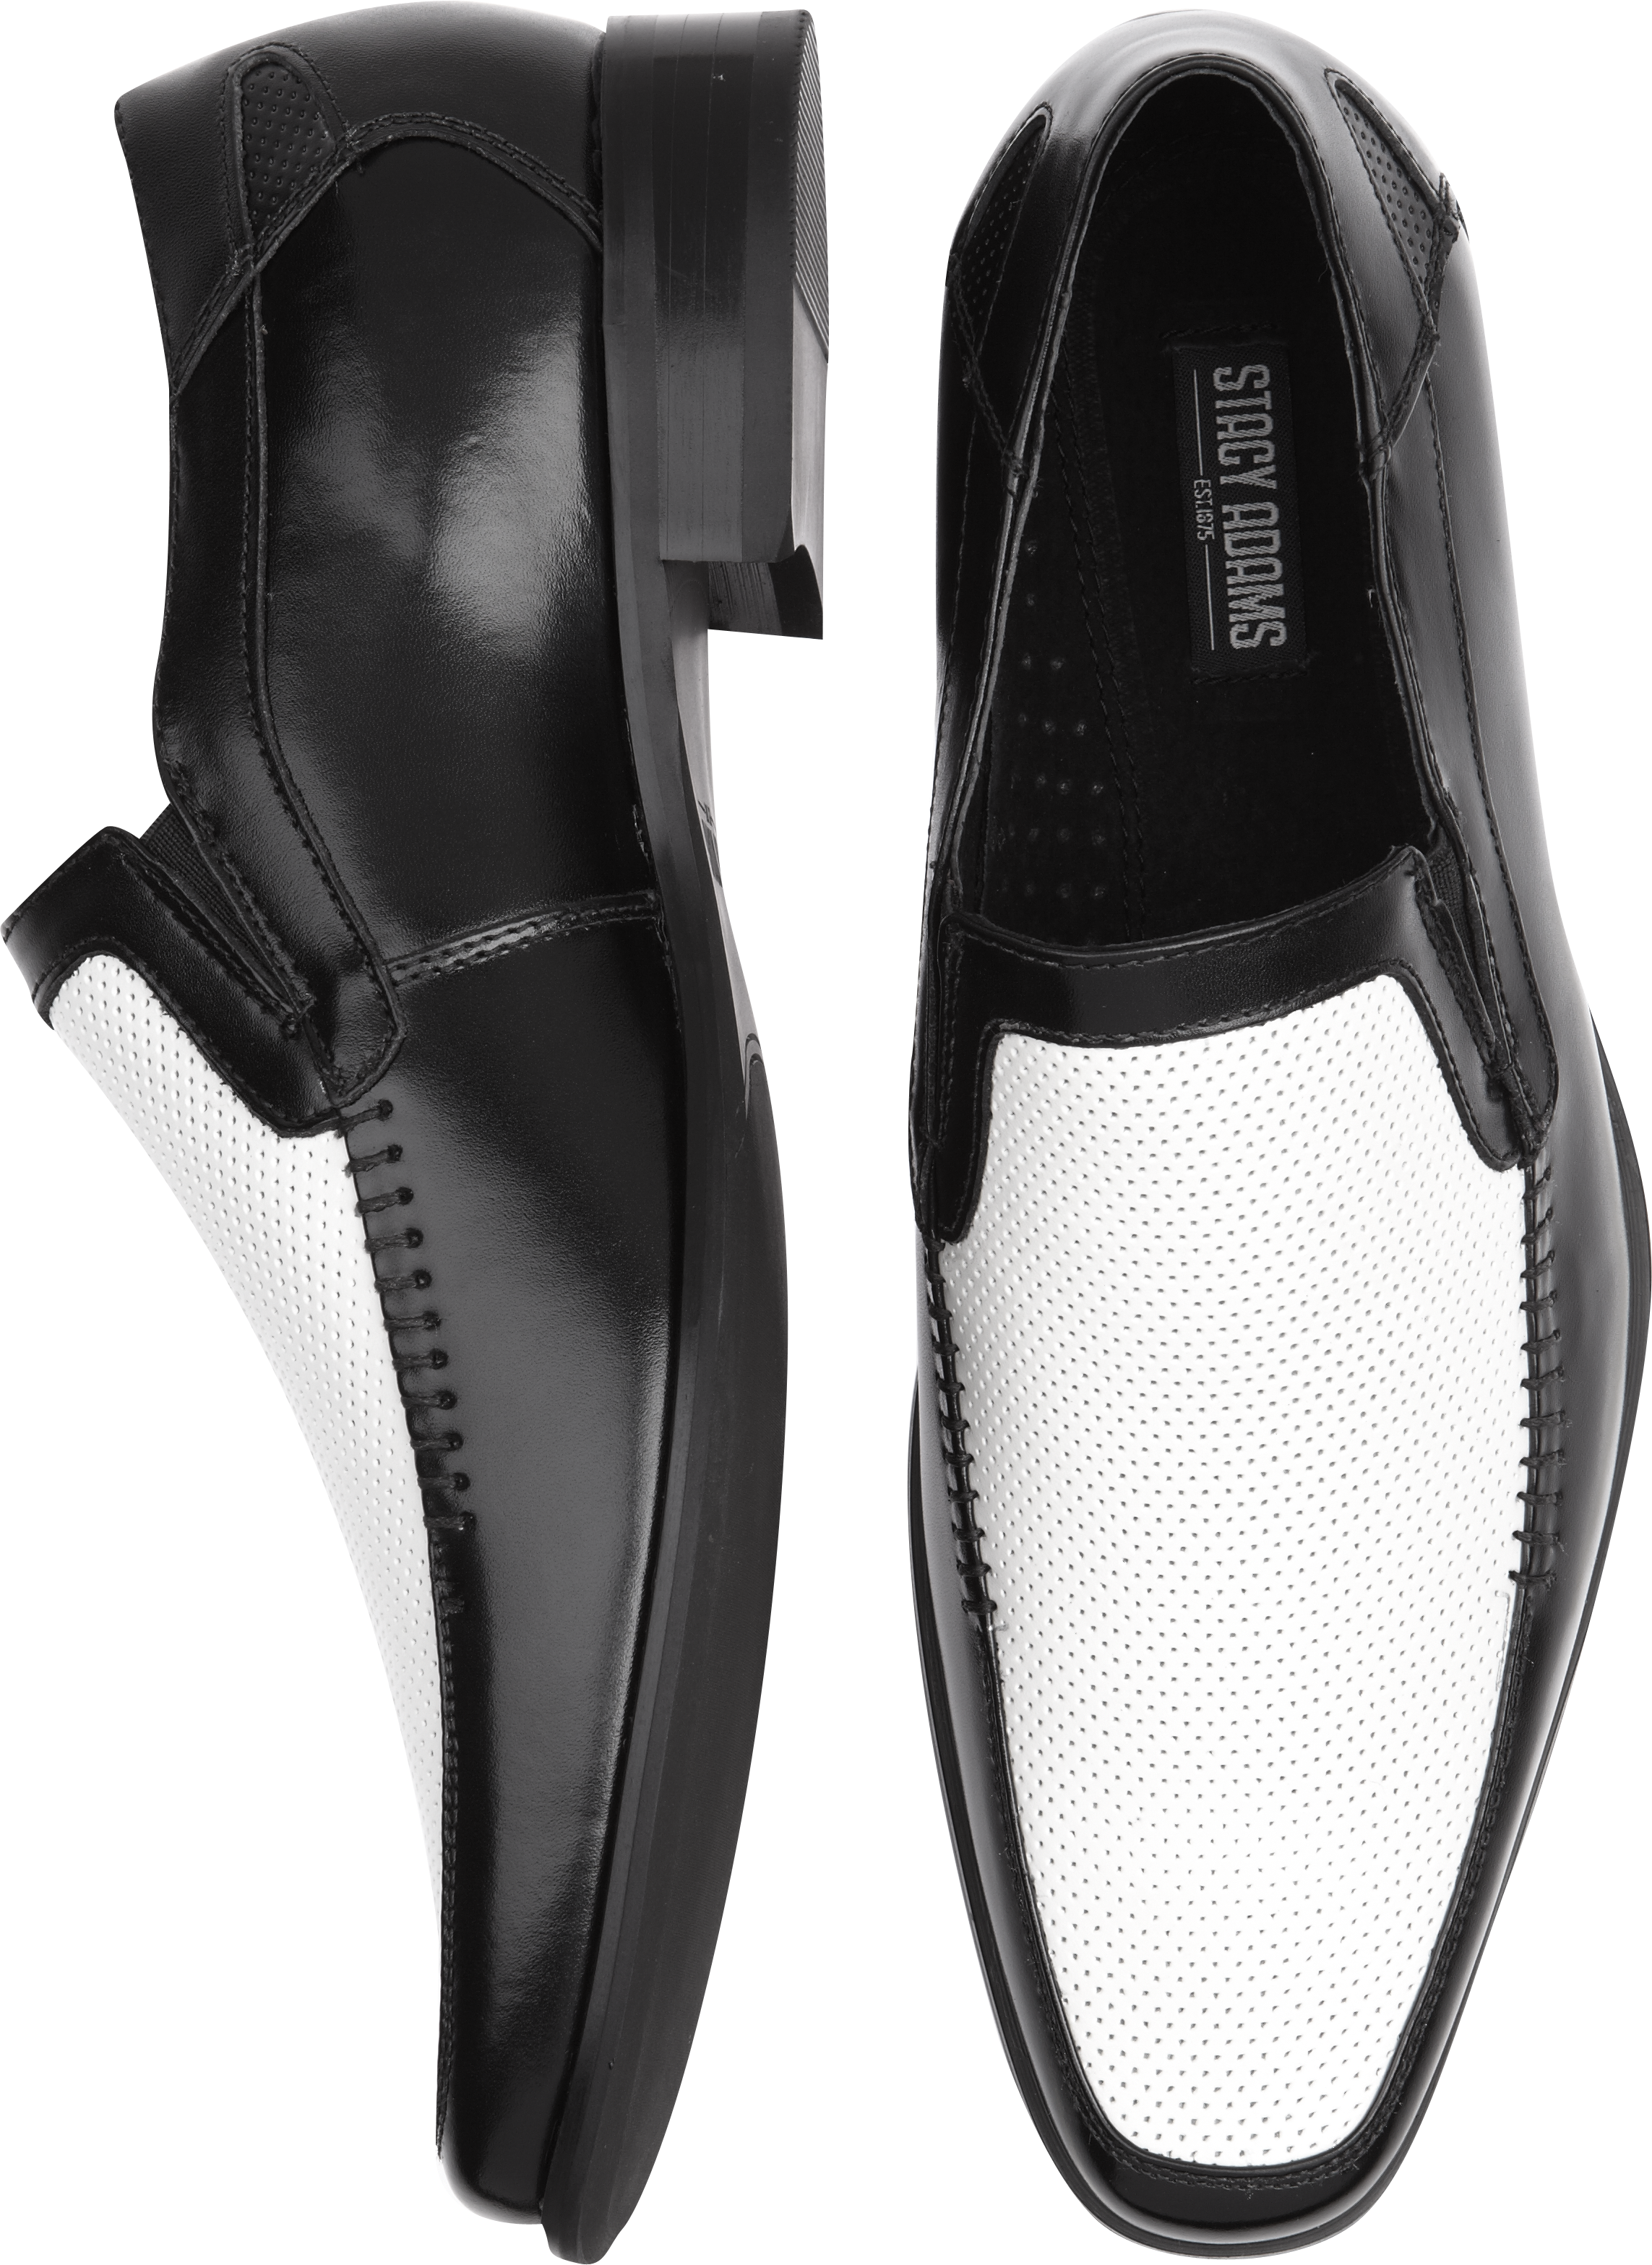 white stacy adams loafers